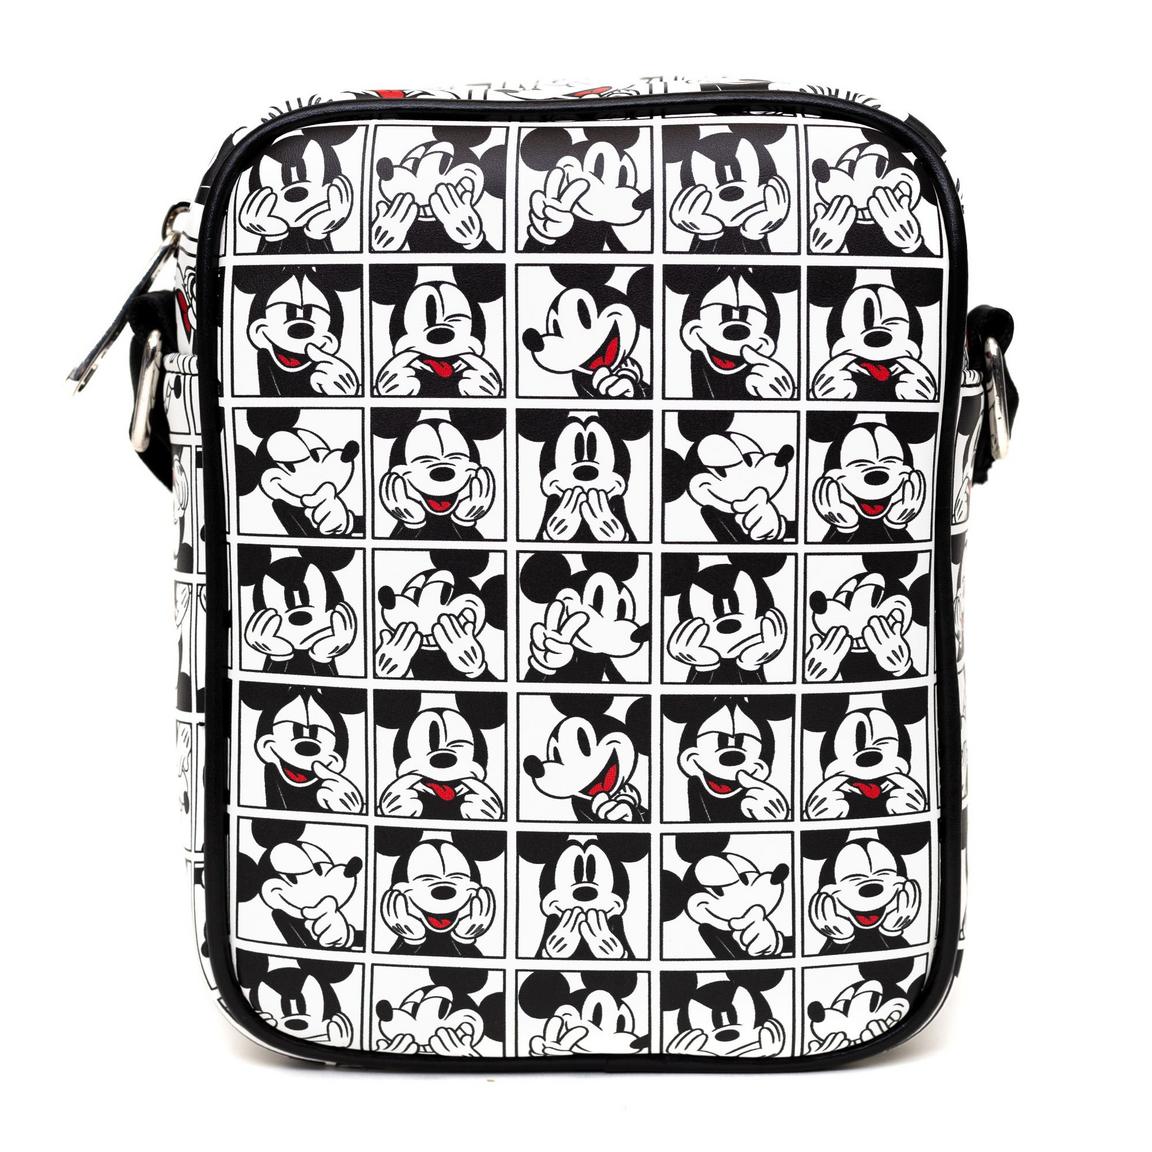 Buckle-Down Disney Mickey Mouse Photoshoot Polyurethane Crossbody Bag with Piping Edge and Cell Phone Pocket, Size: One Size, Buckle Down